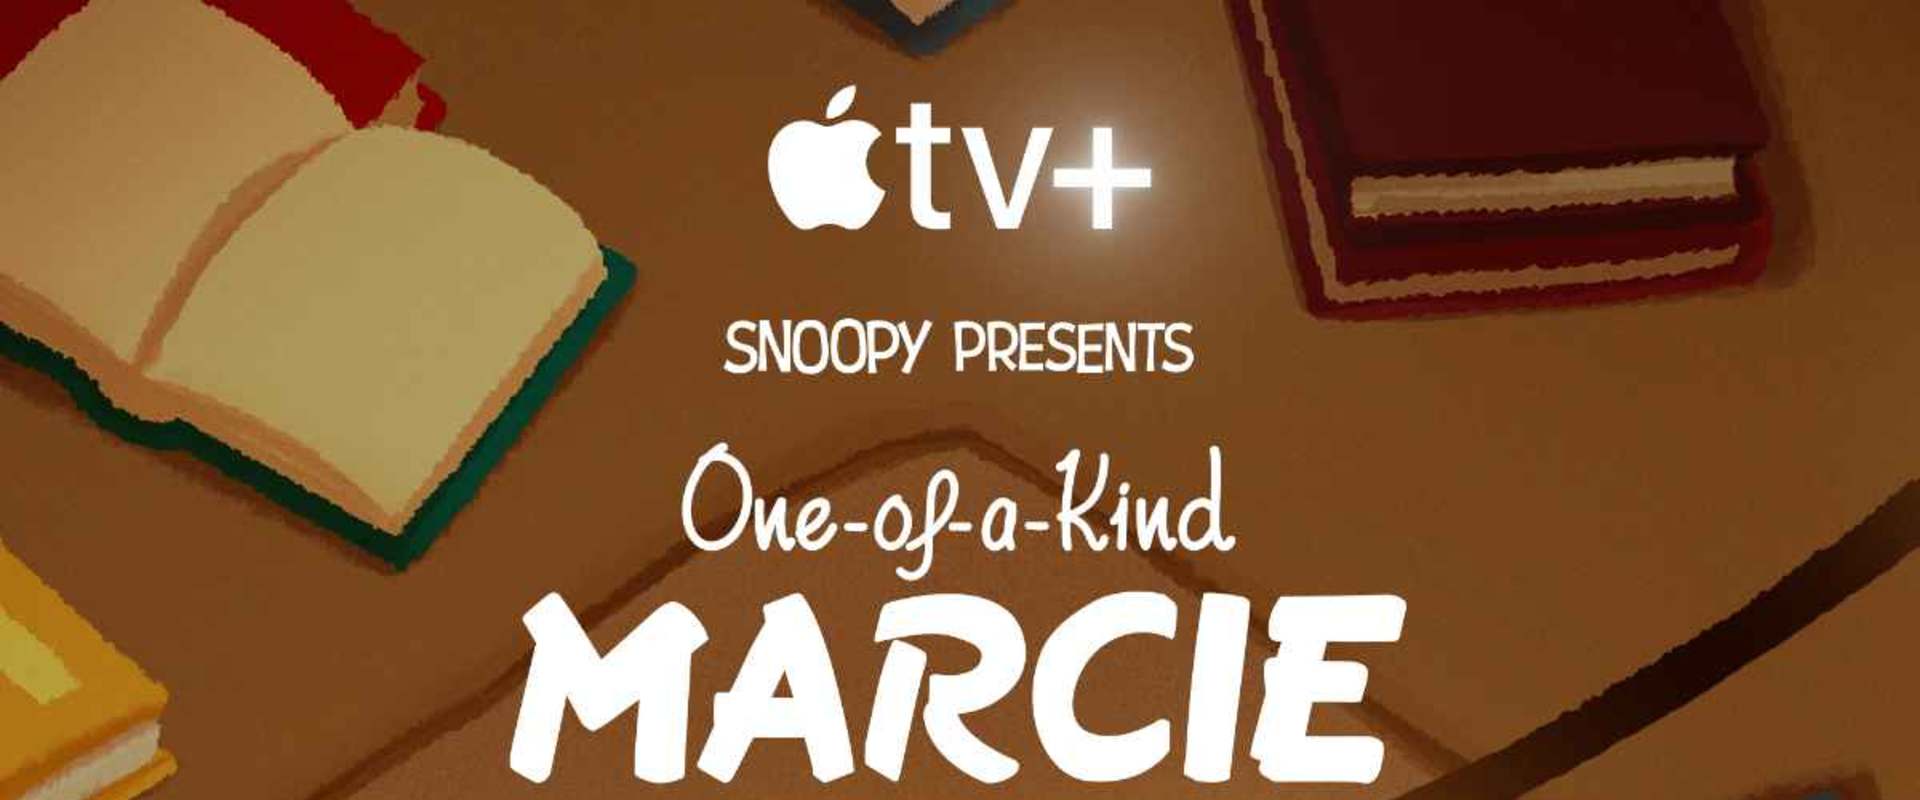 Snoopy Presents: One-of-a-Kind Marcie background 2